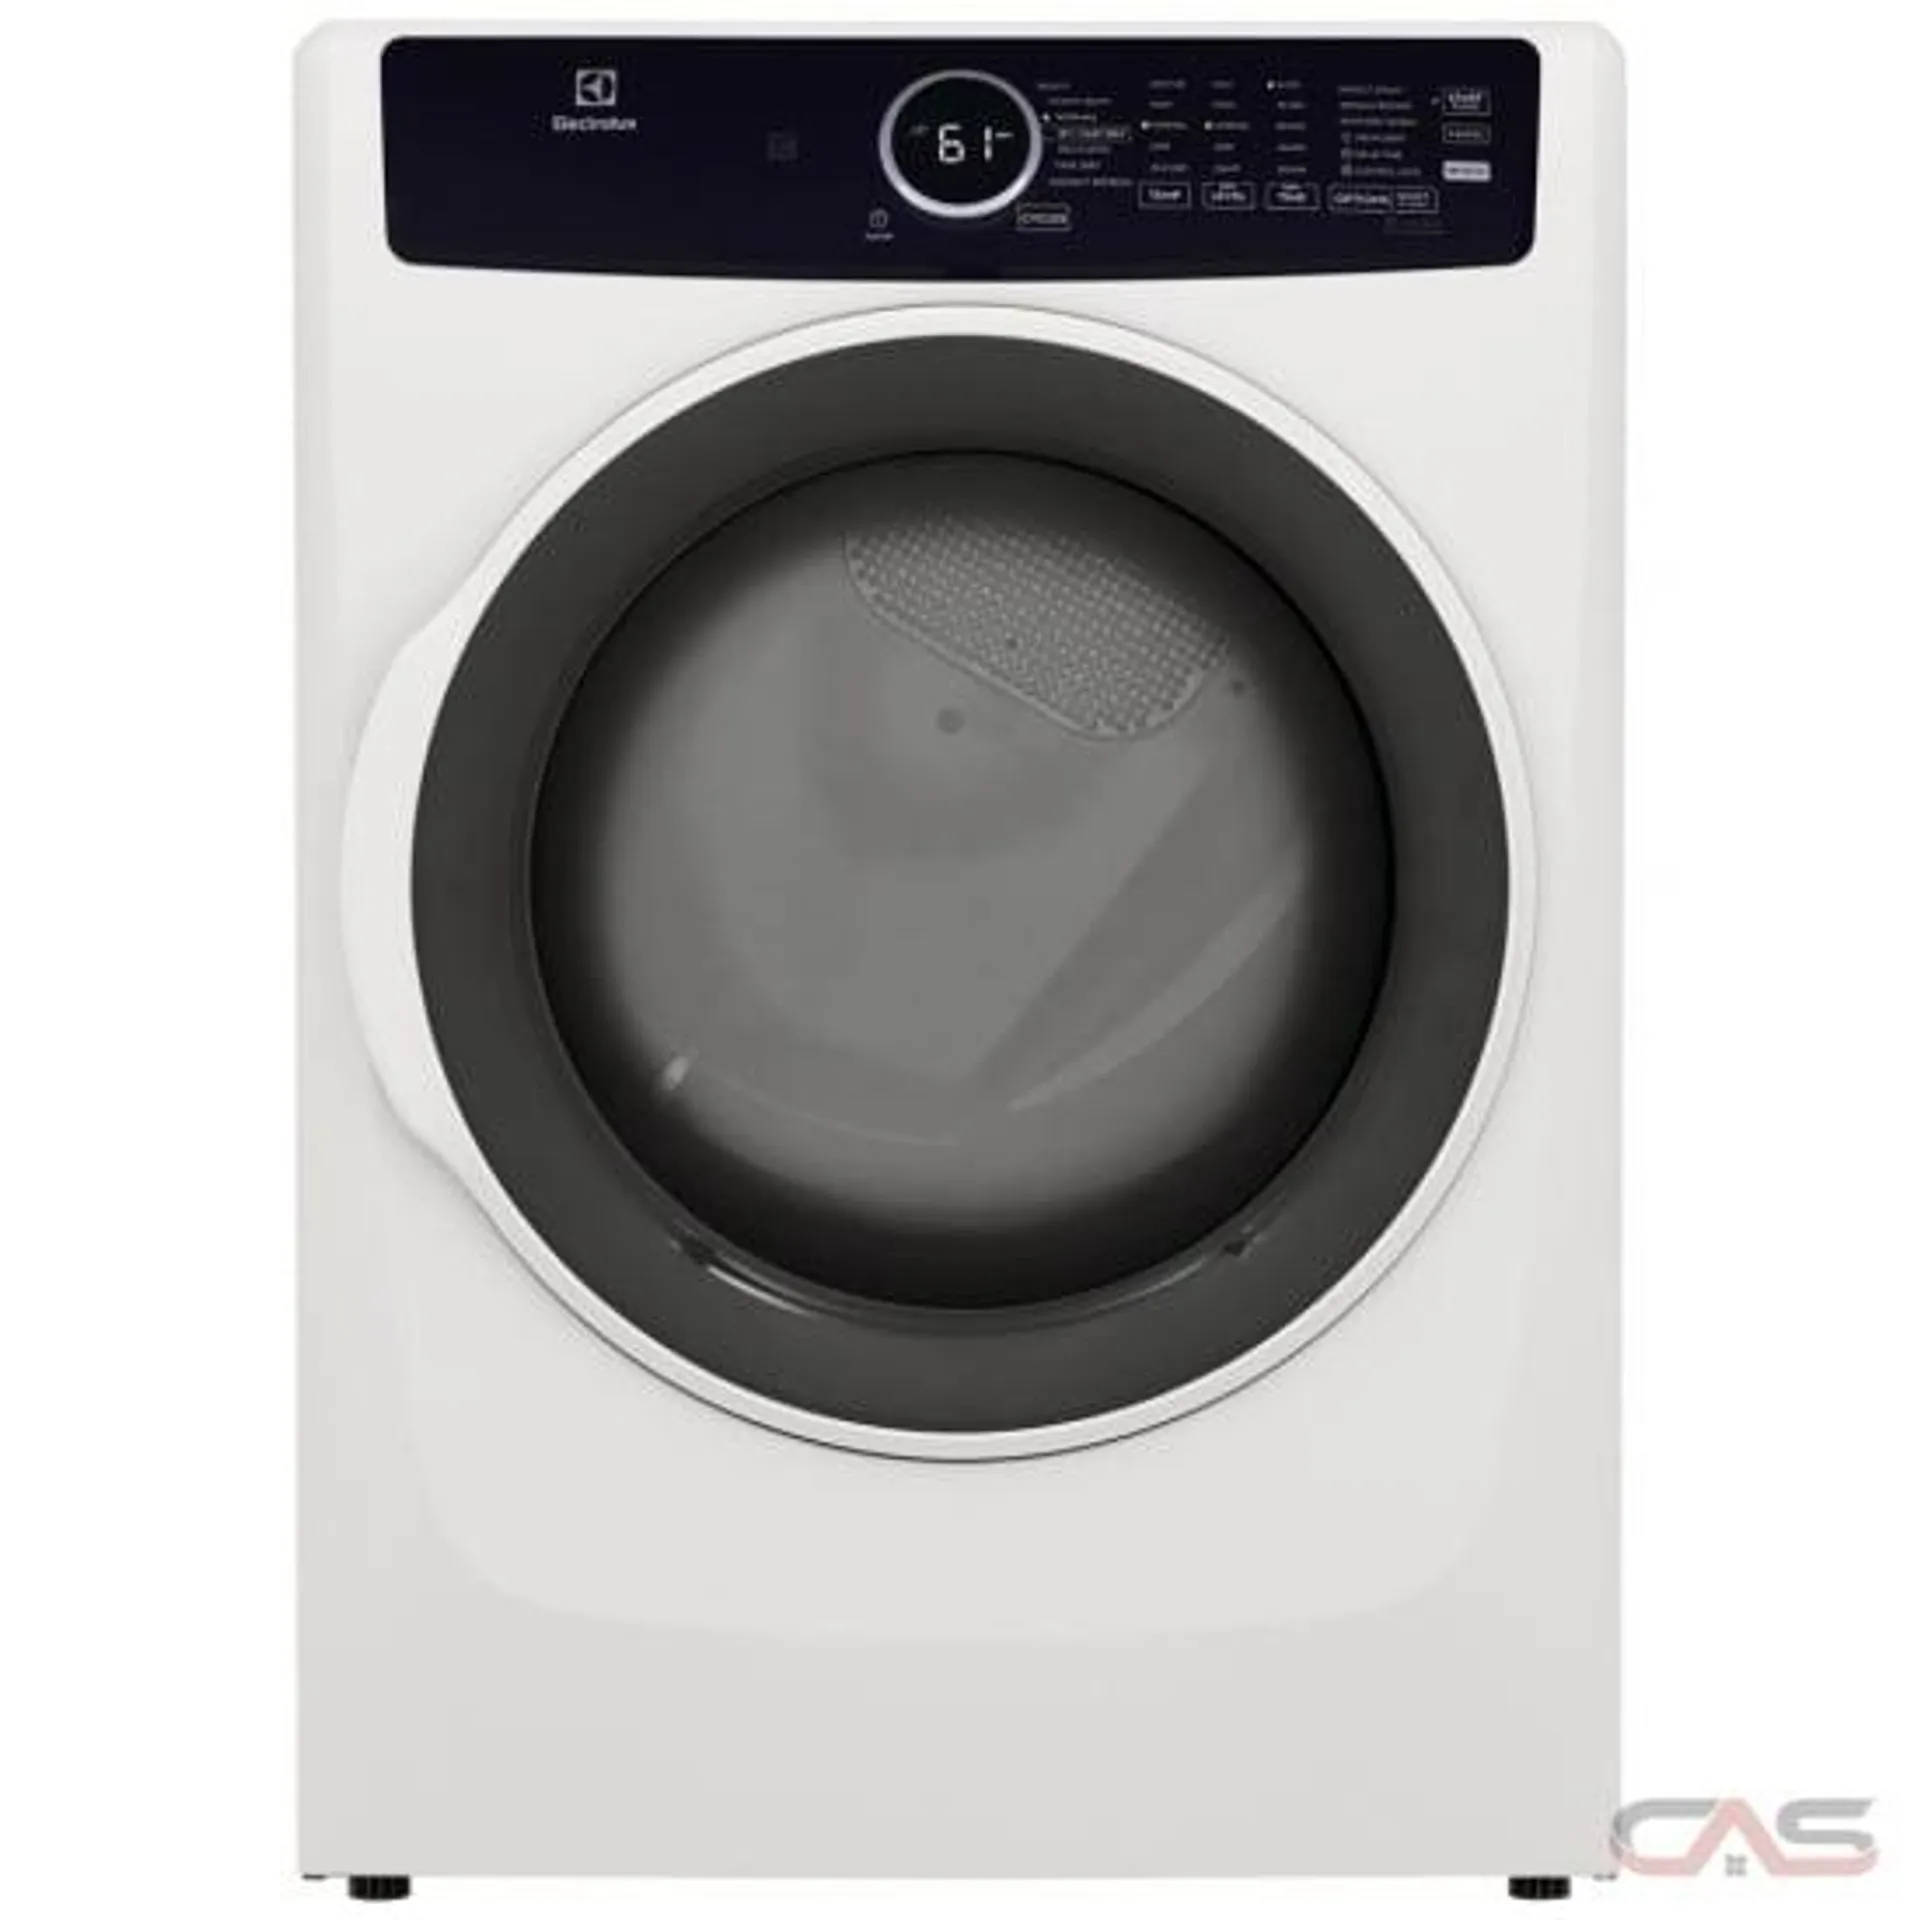 Electrolux ELFG7437AW Dryer, 27 inch Width, Gas Dryer, 8.0 cu. ft. Capacity, Steam Clean, 7 Dry Cycles, 5 Temperature Settings, Stackable, Steel Drum, White colour